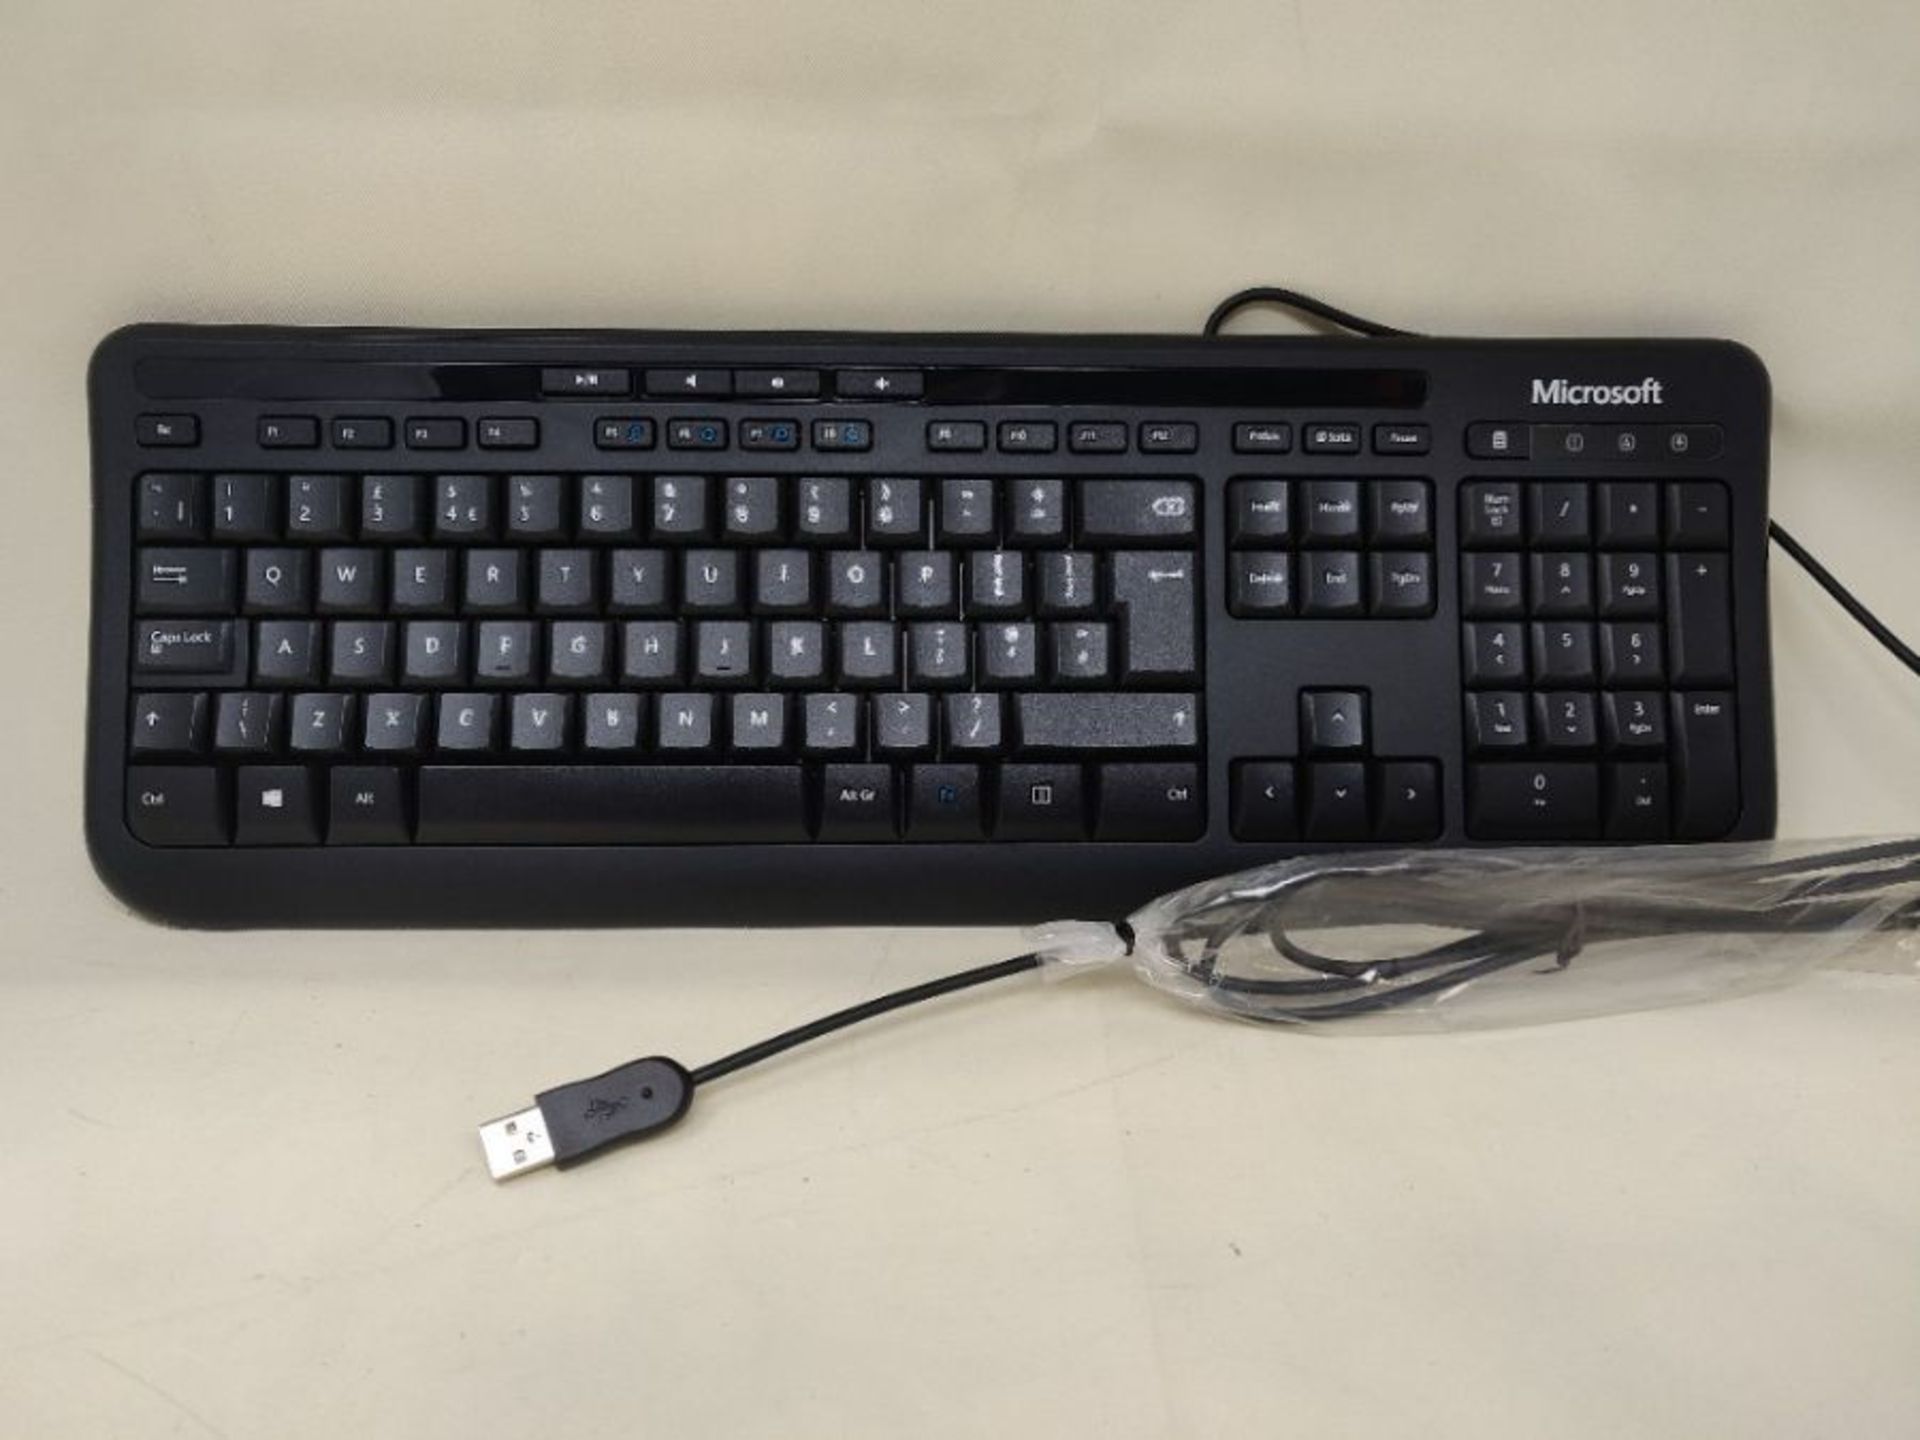 [INCOMPLETE] Microsoft Wired Desktop 600 Keyboard and Mouse Set, UK Layout - Black - Image 3 of 3